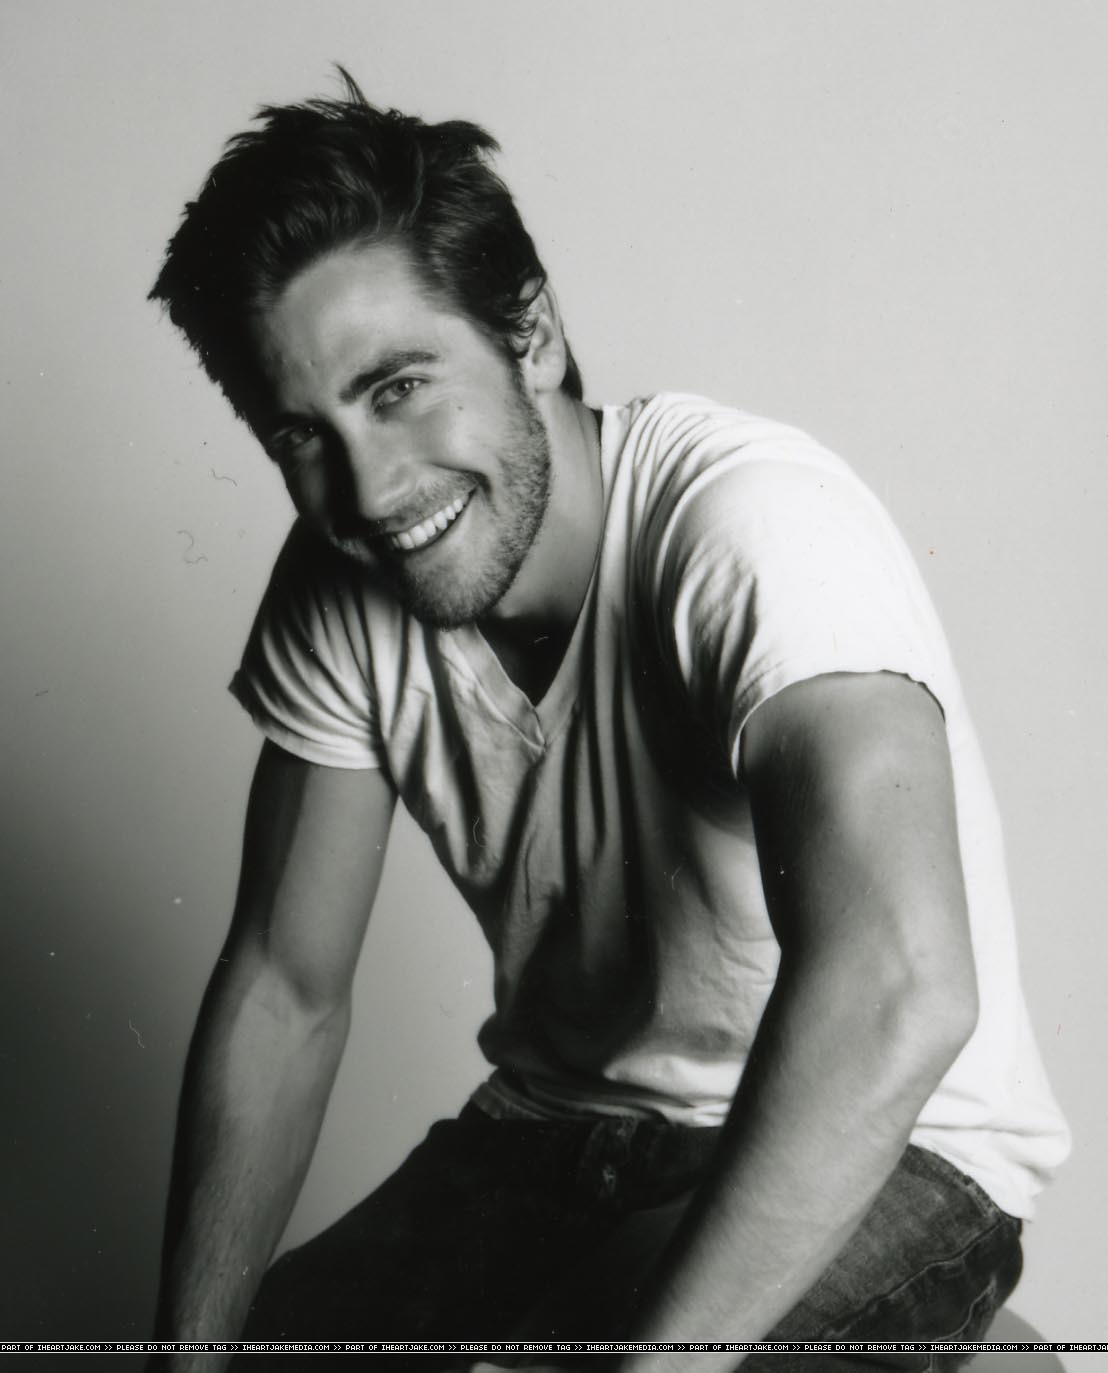 Lock on to JG: Awesome Jake Gyllenhaal ever! new old pics